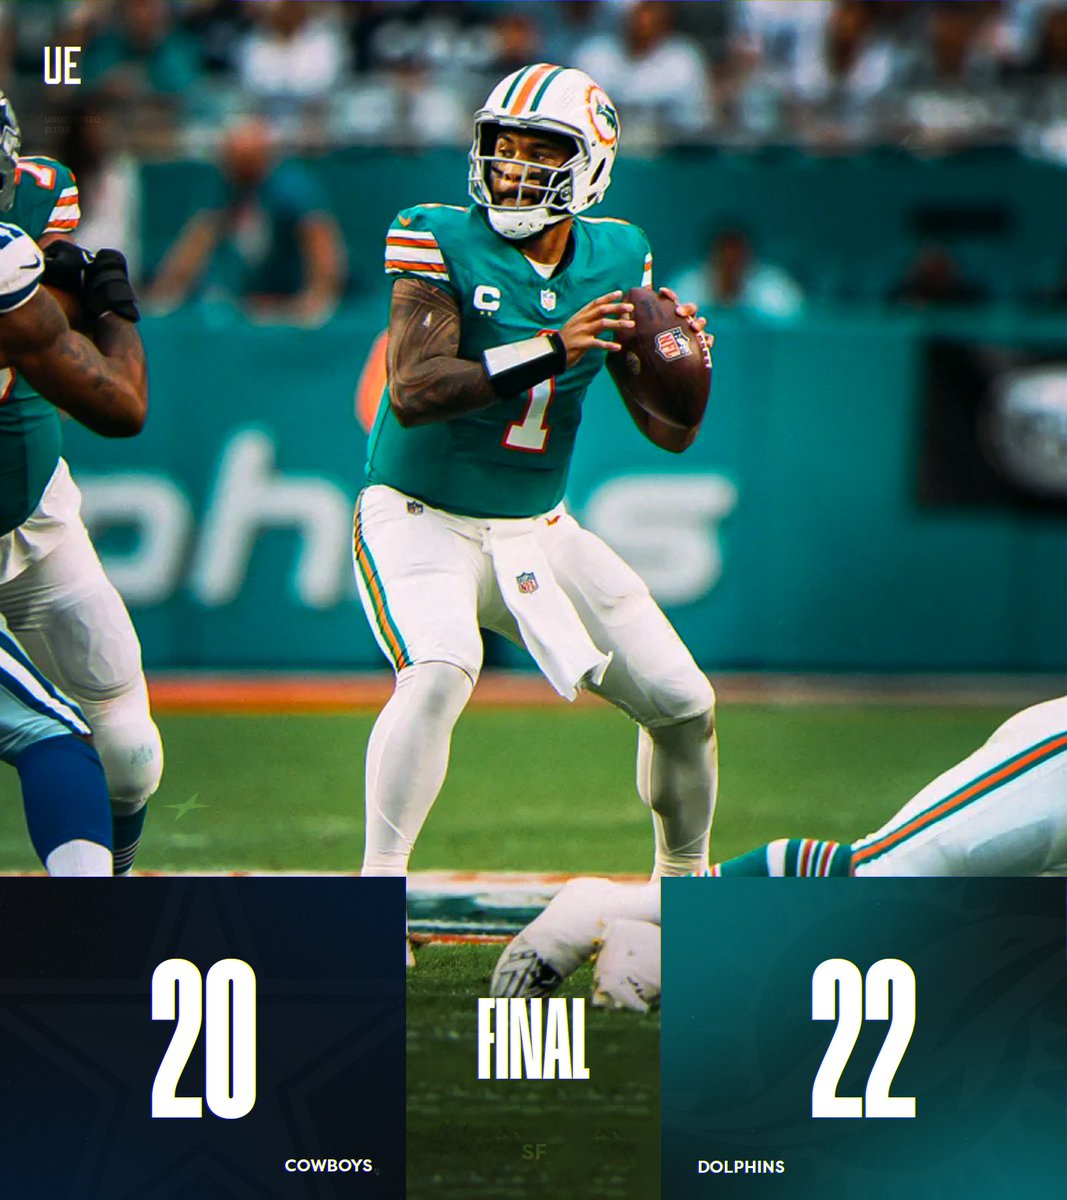 FINAL: The #Dolphins get the last-second victory! 👏

#DALvsMIA